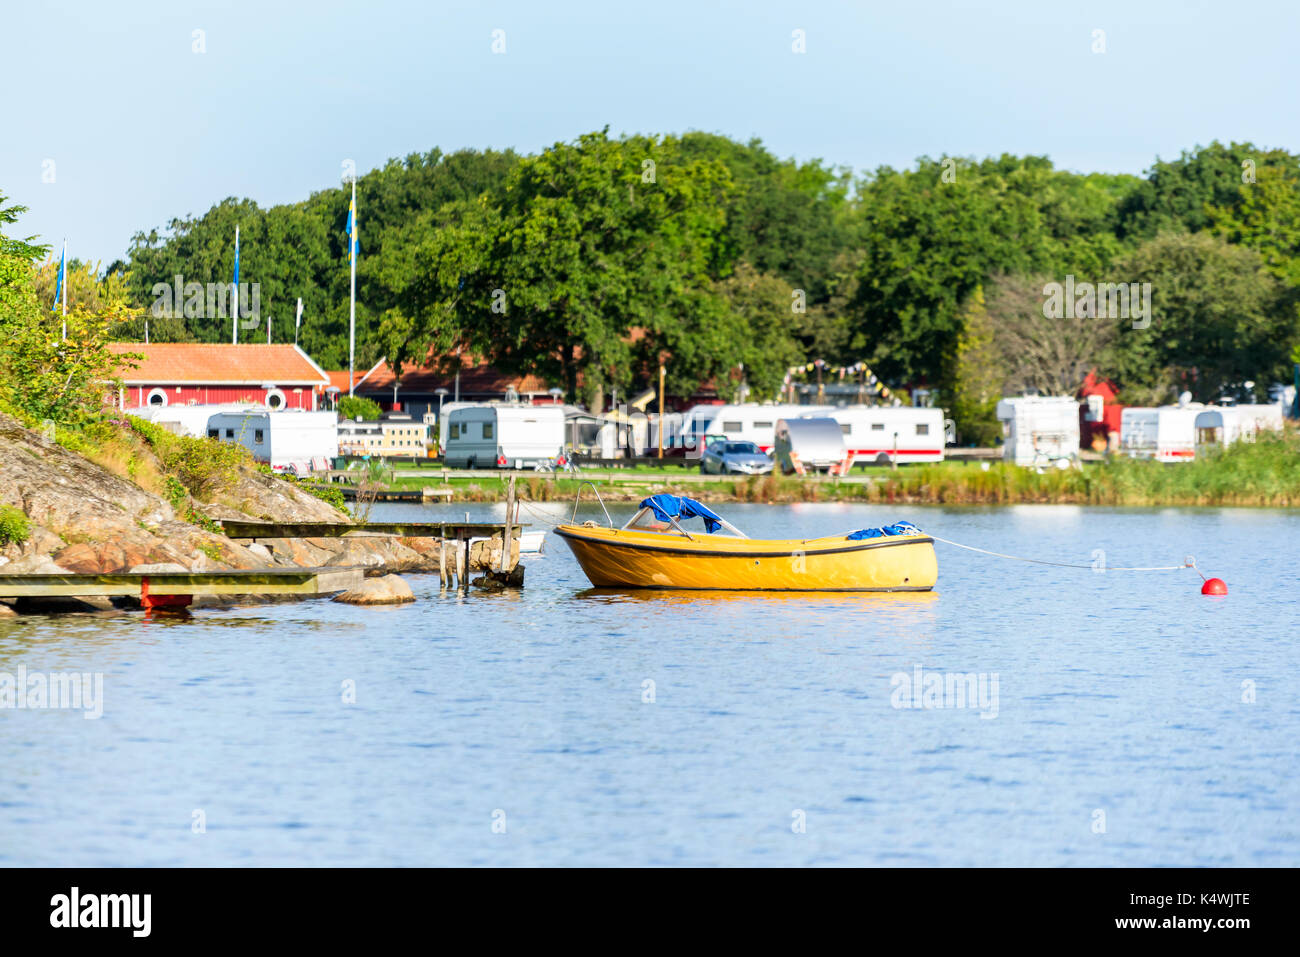 One open yellow motorboat moored to a pier with camping site in background. Location Karlskrona, Sweden. Stock Photo